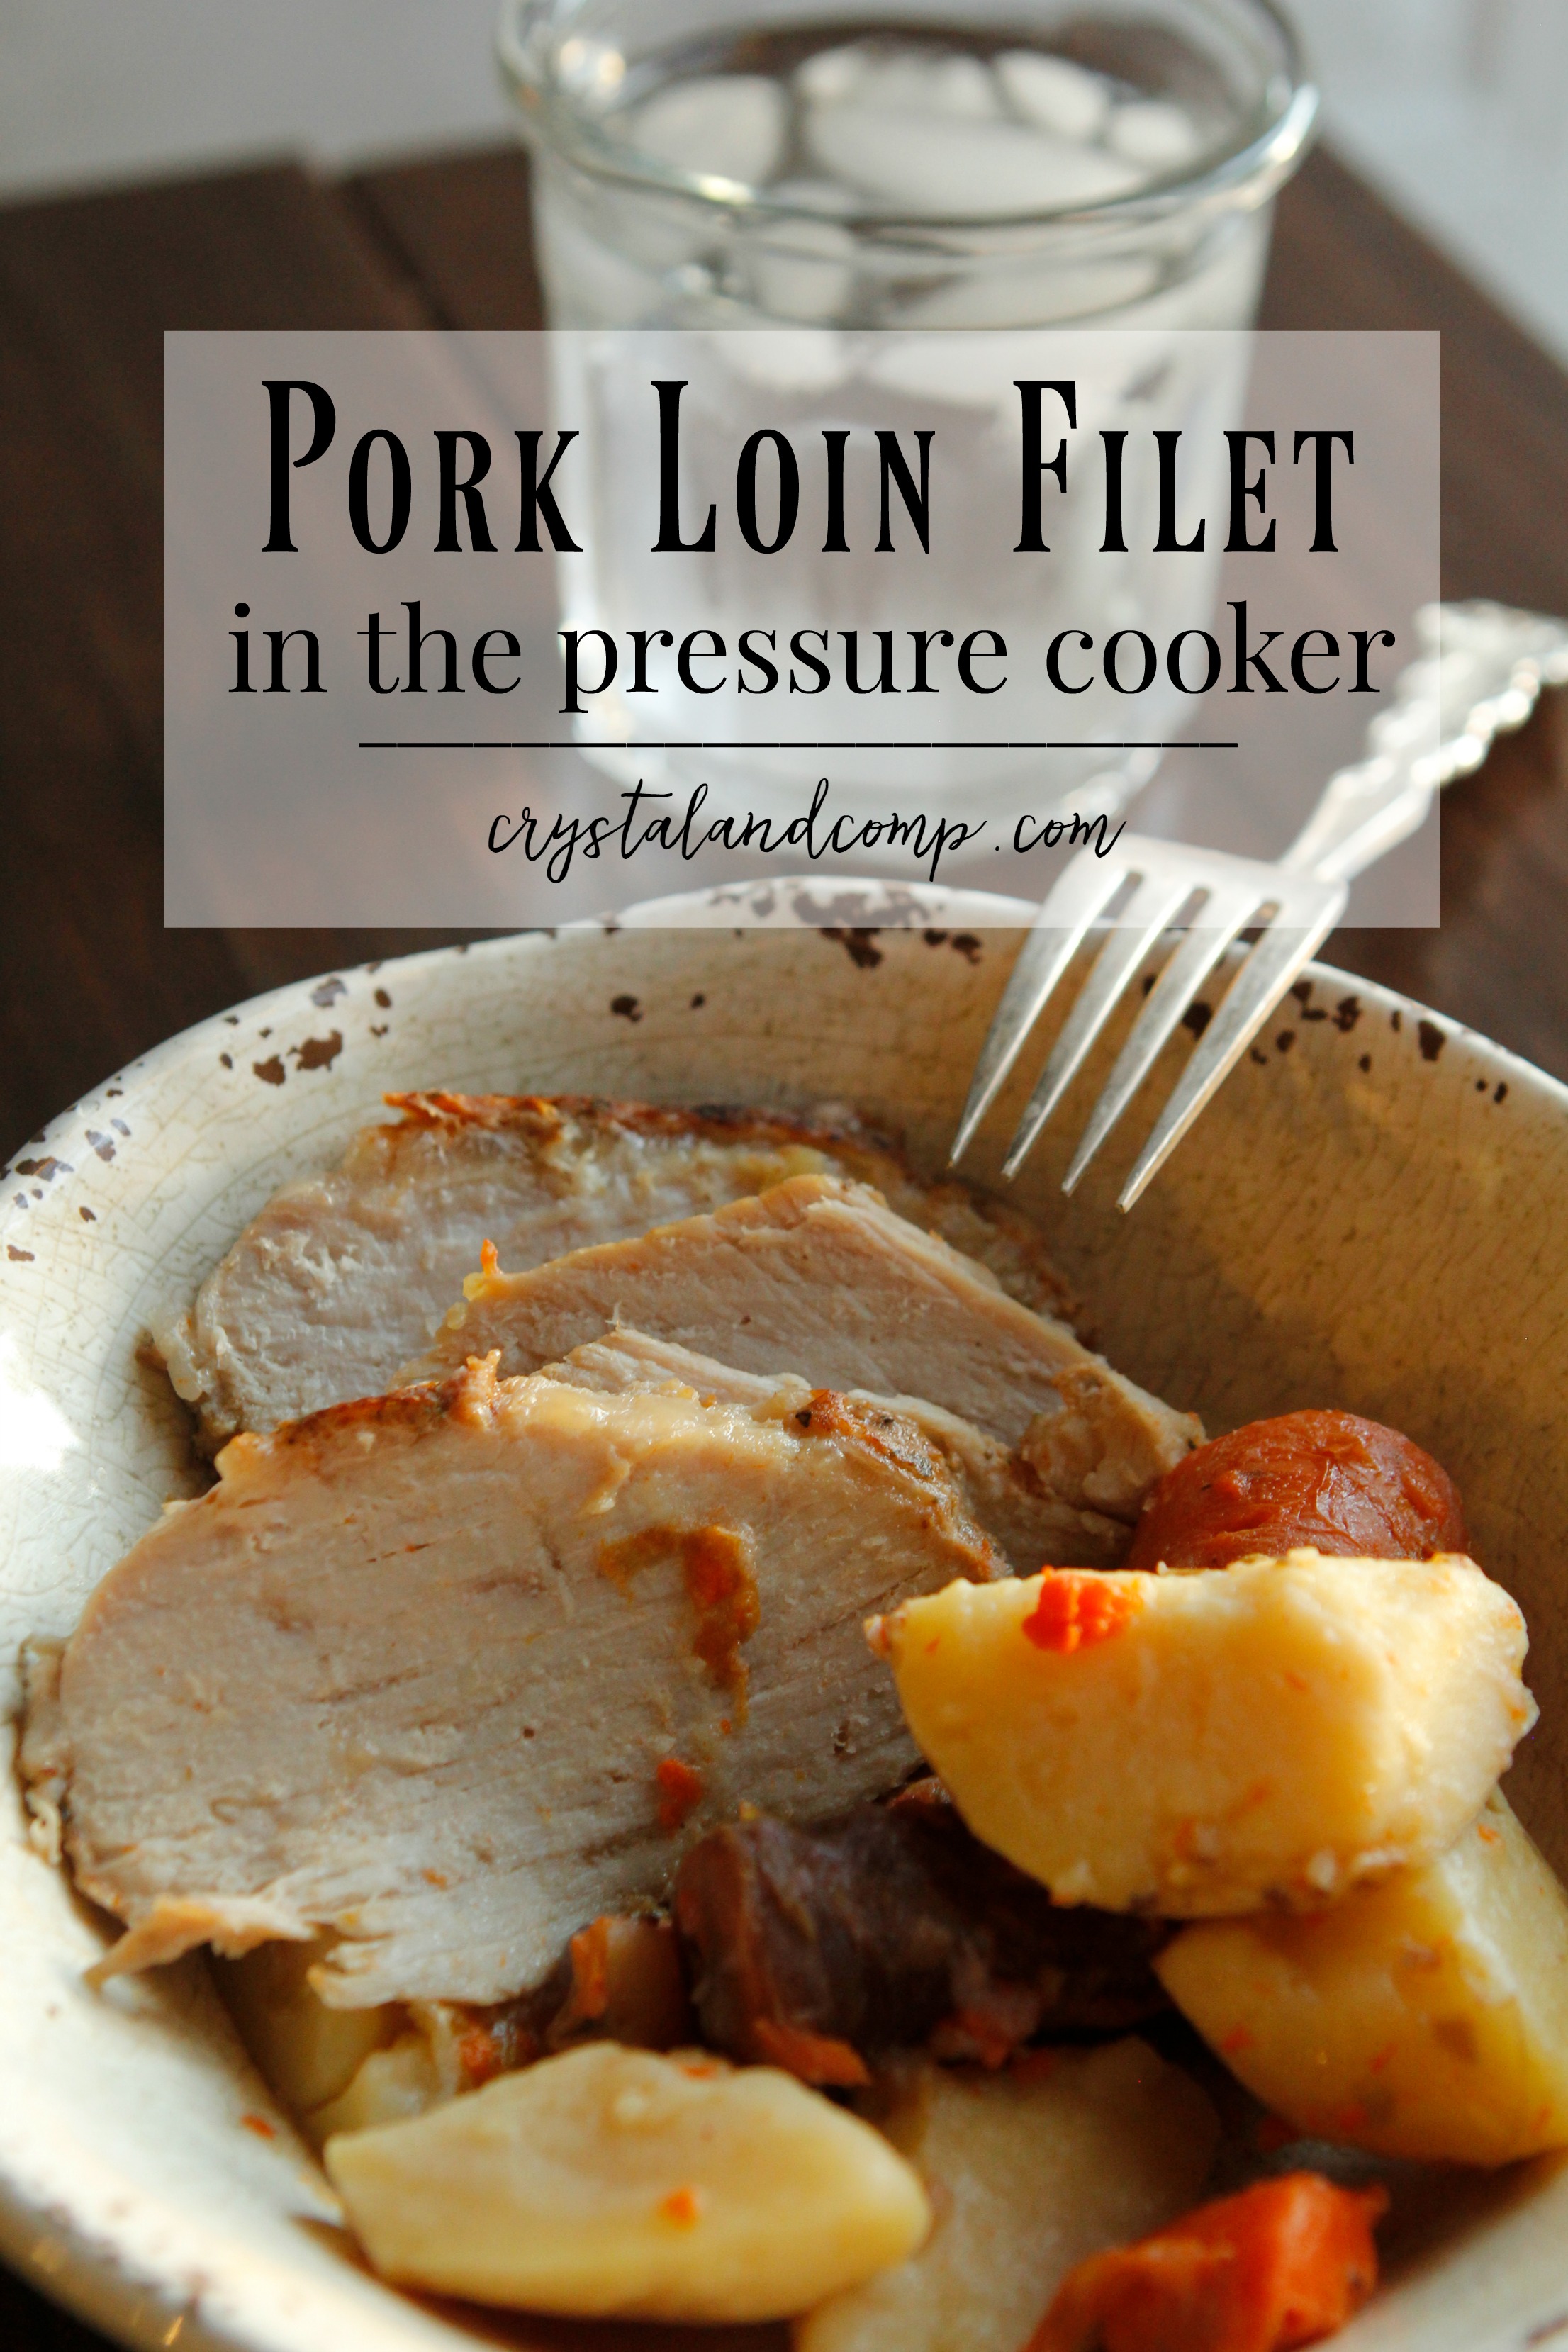 How To Cook Pork Loin Filet In The Pressure Cooker